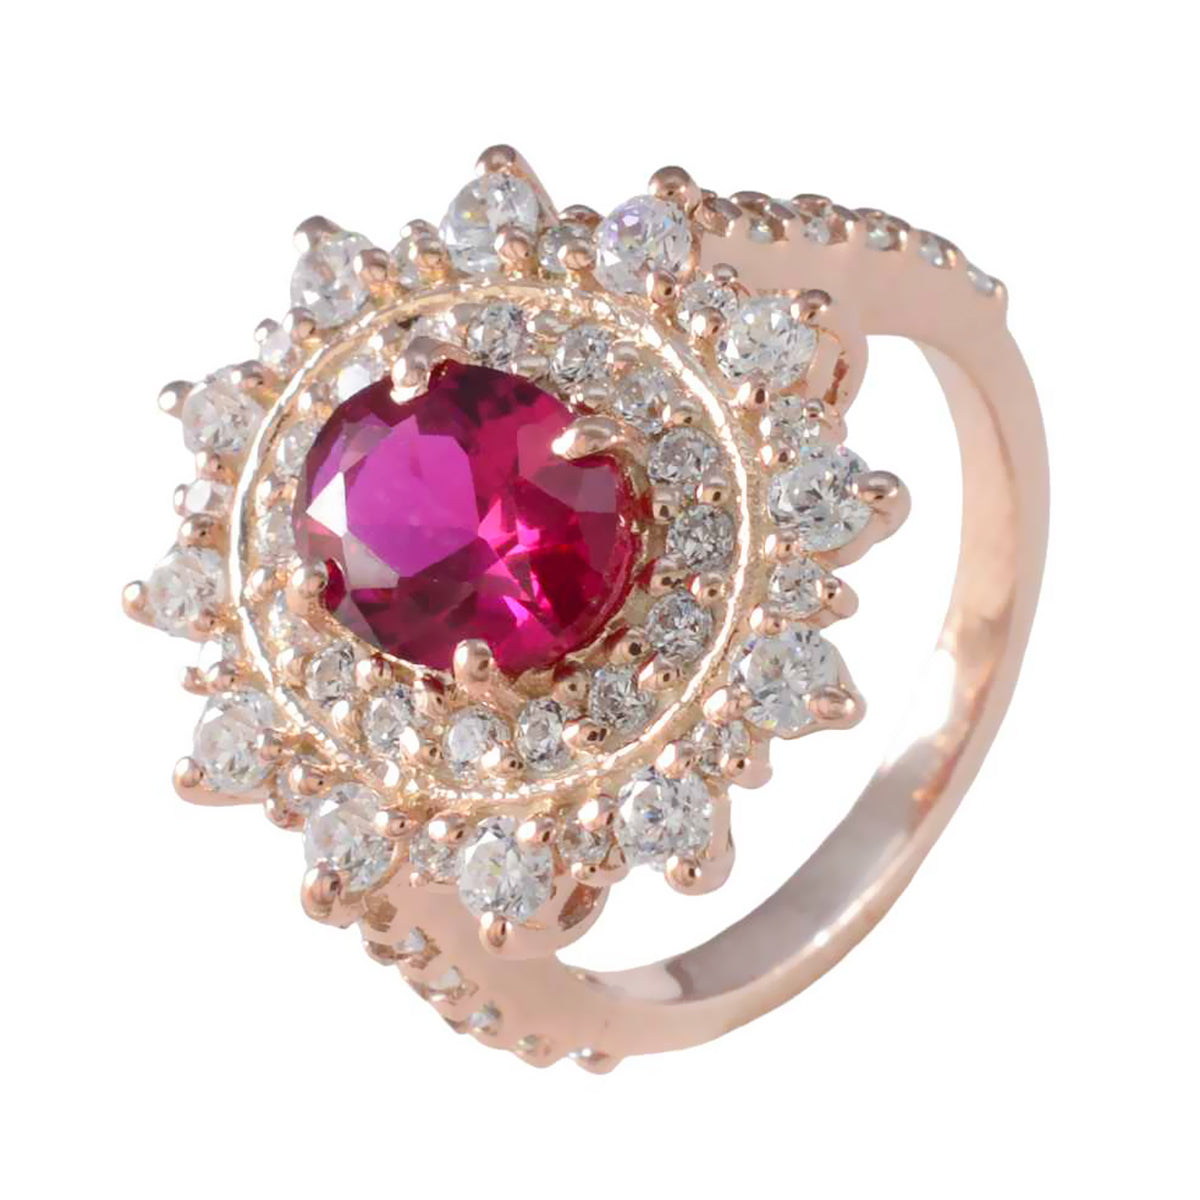 Riyo Total Silver Ring With Rose Gold Plating Ruby CZ Stone Oval Shape Prong Setting Stylish Jewelry Mothers Day Ring